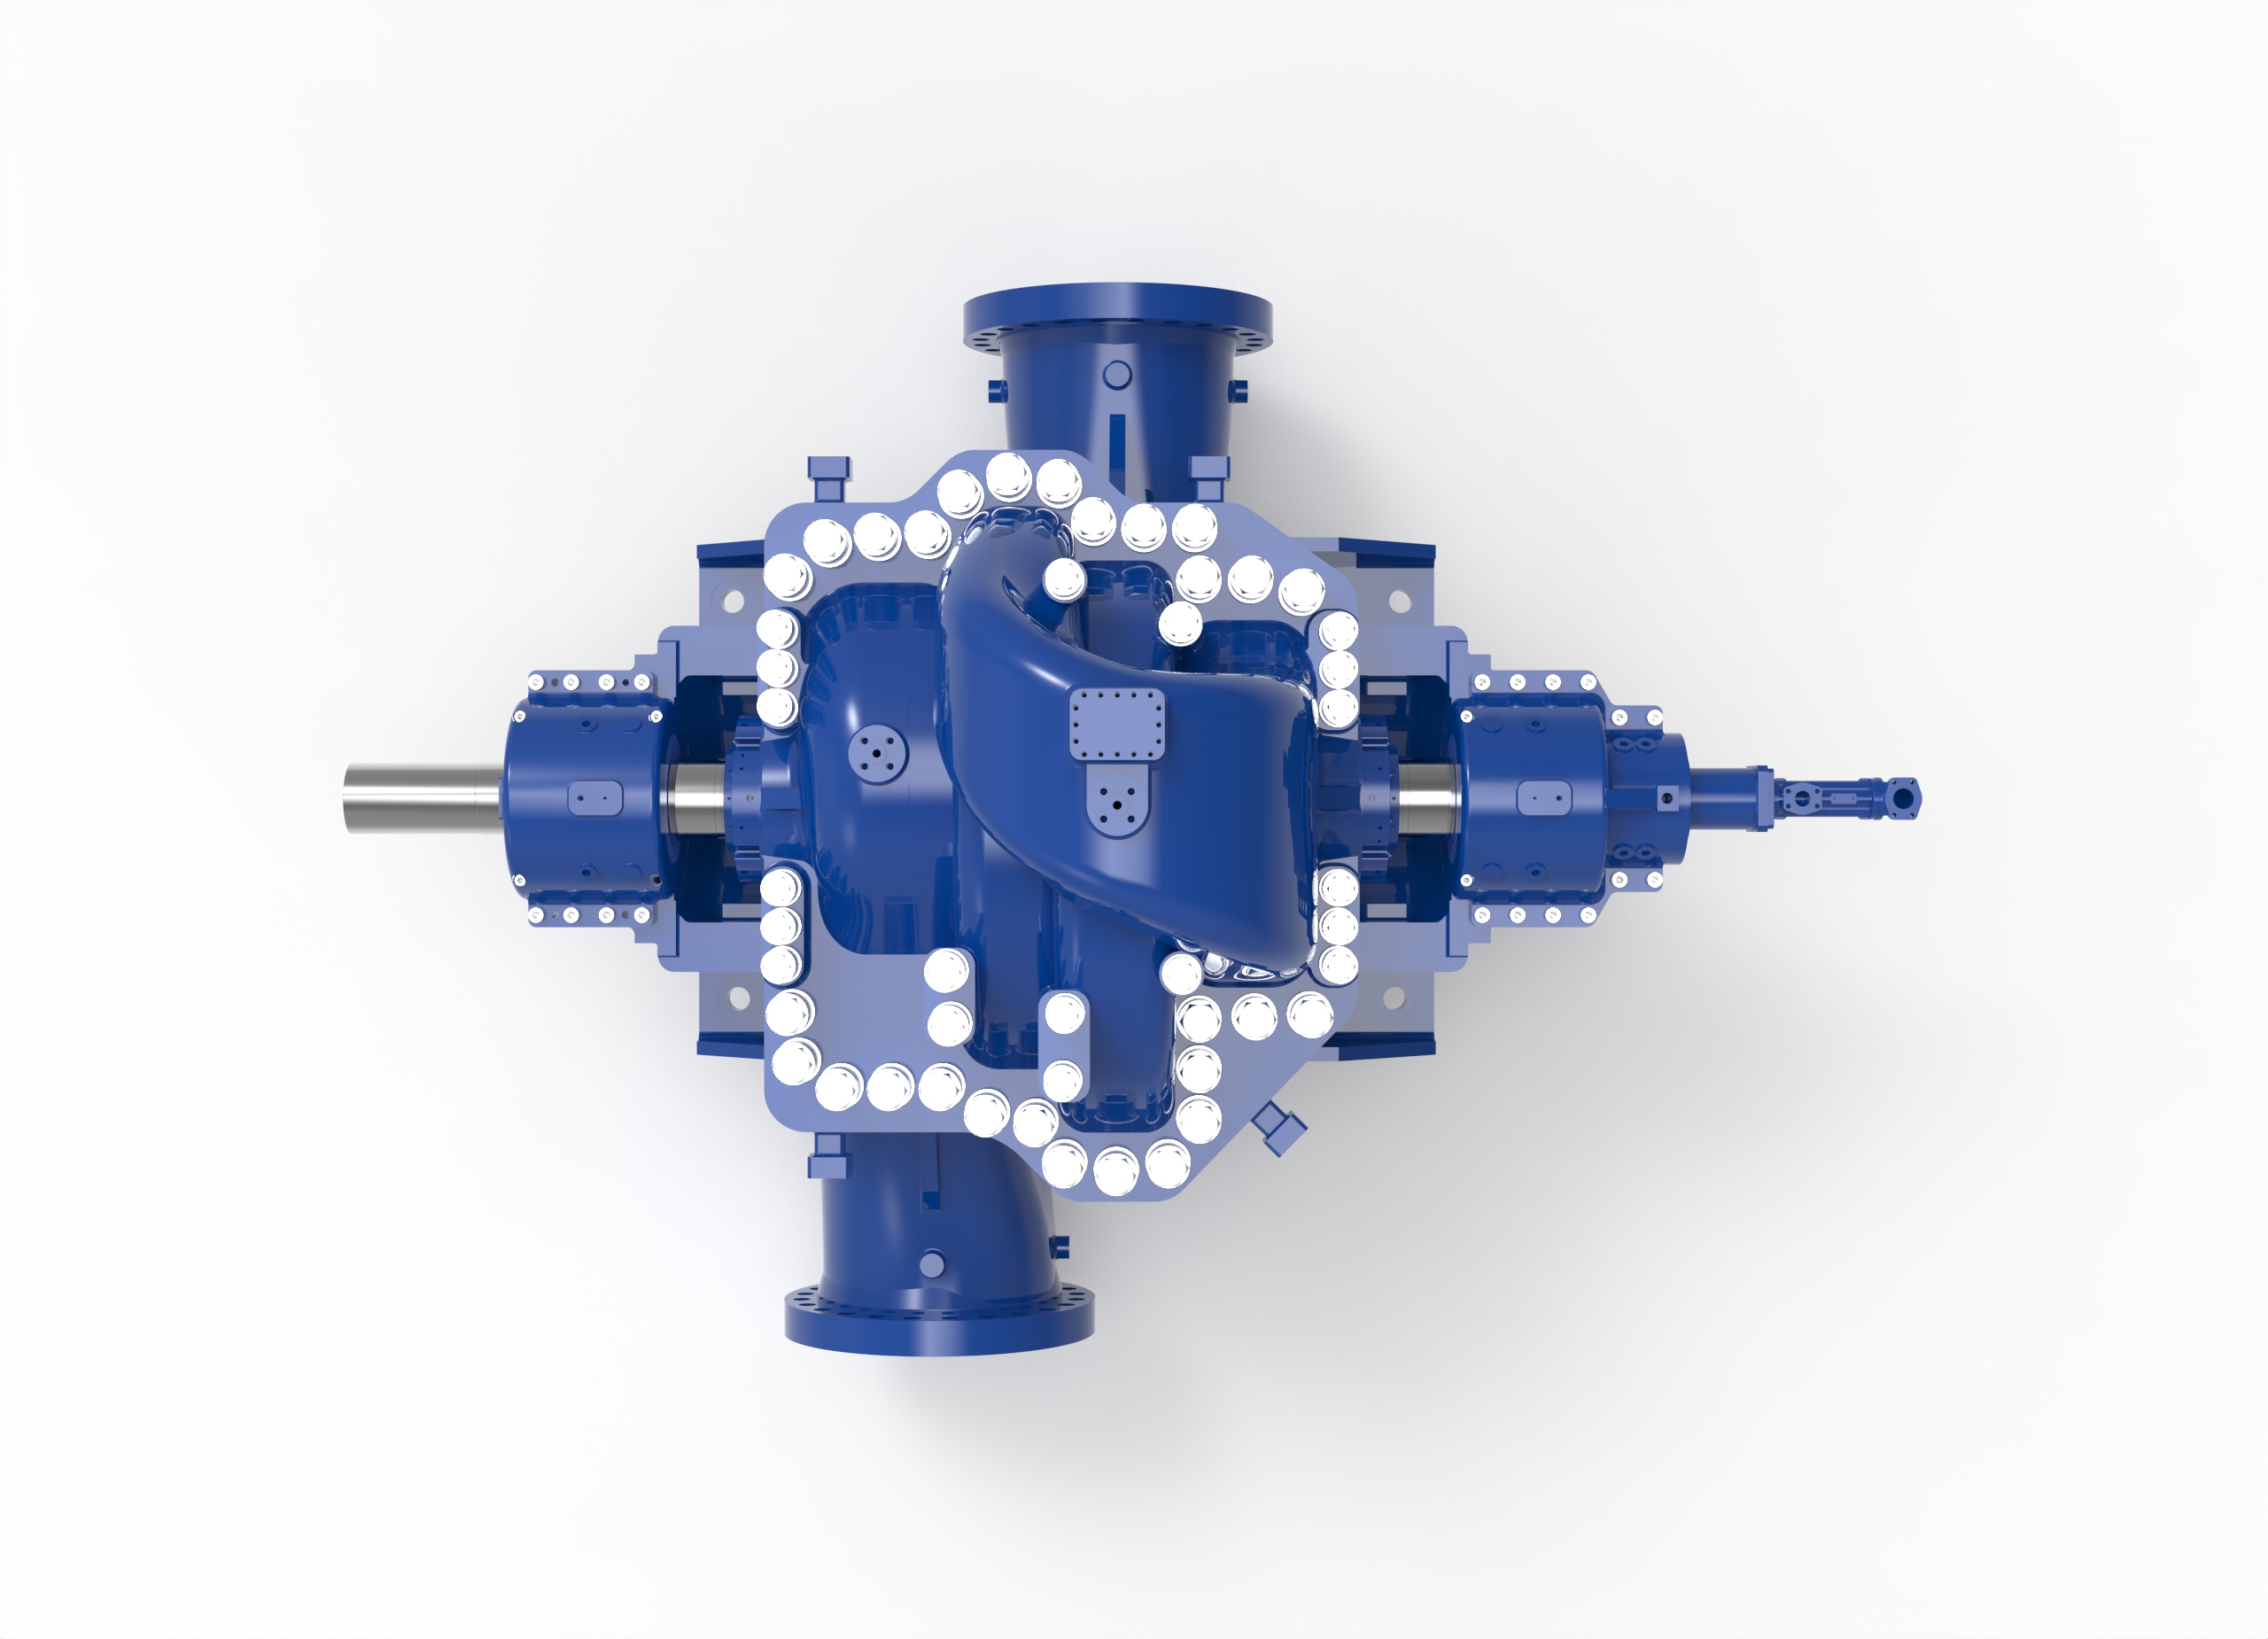 Top view of a Termomeccanica Pompe D2 & D2D & DD2D BB1 TYPE API 610 Centrifugal Pump manufactured by Trillium Flow Technologies